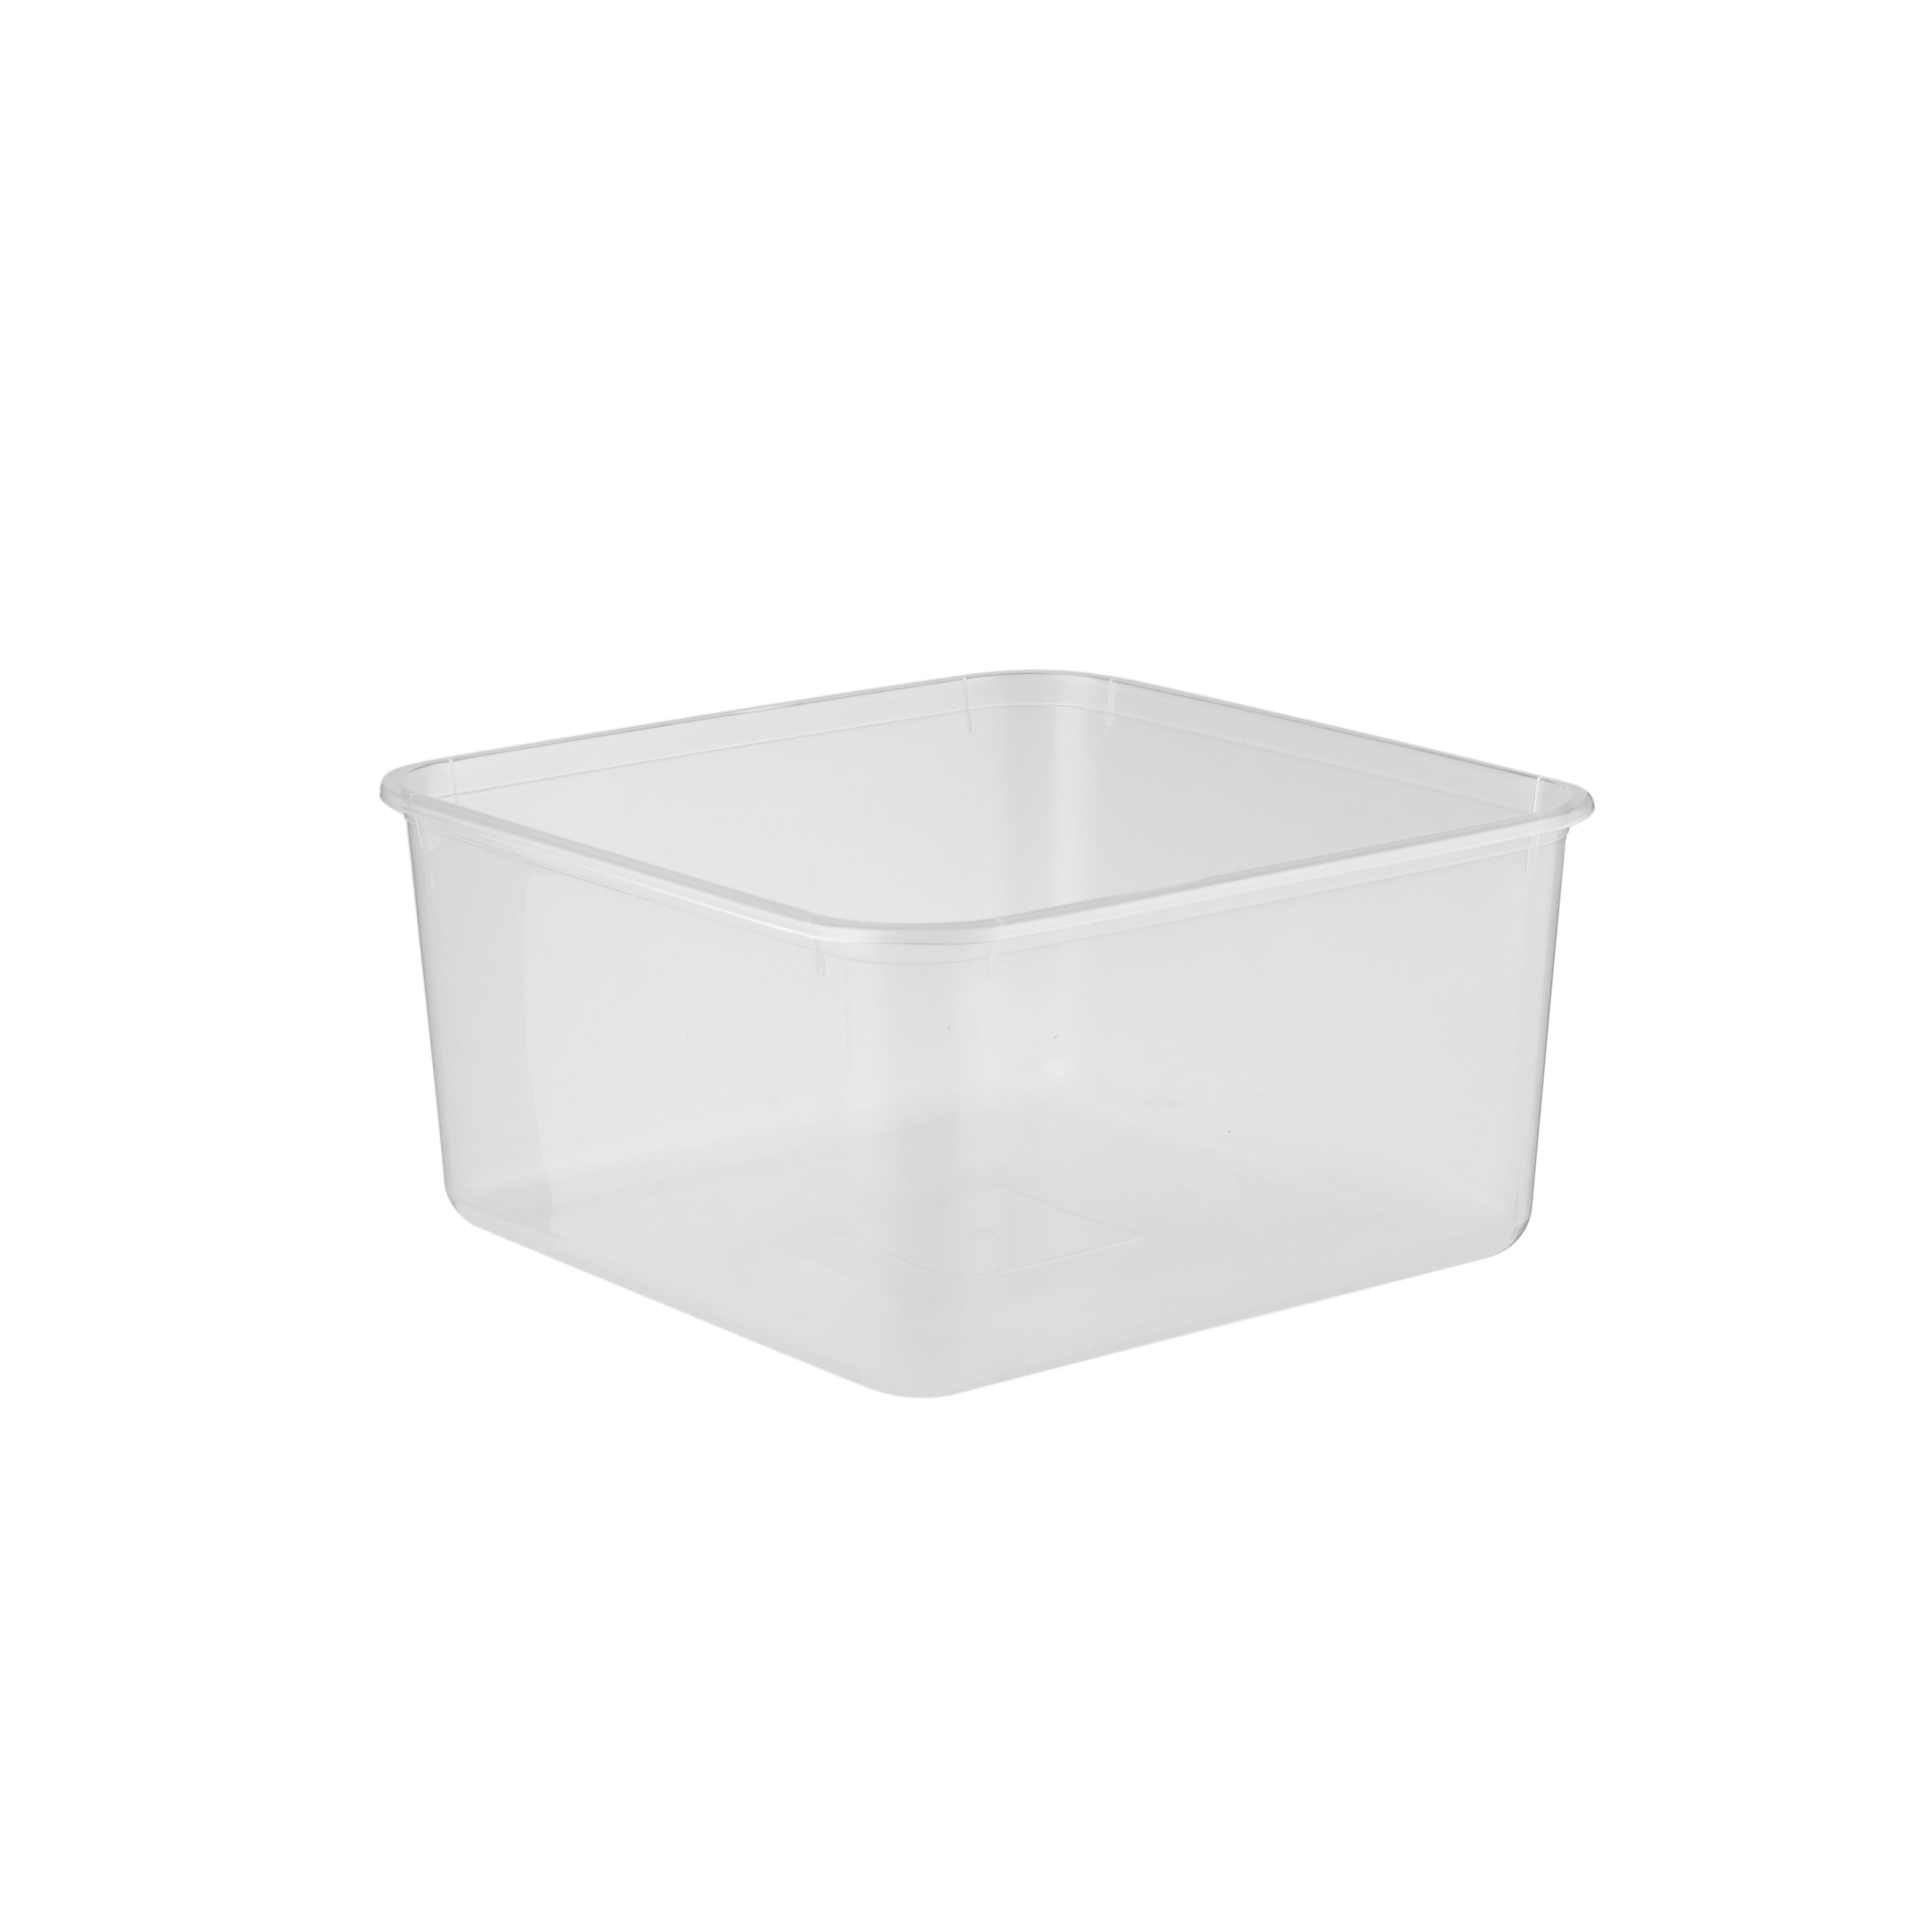 Clear Microwavable Rectangular Container with color Lids